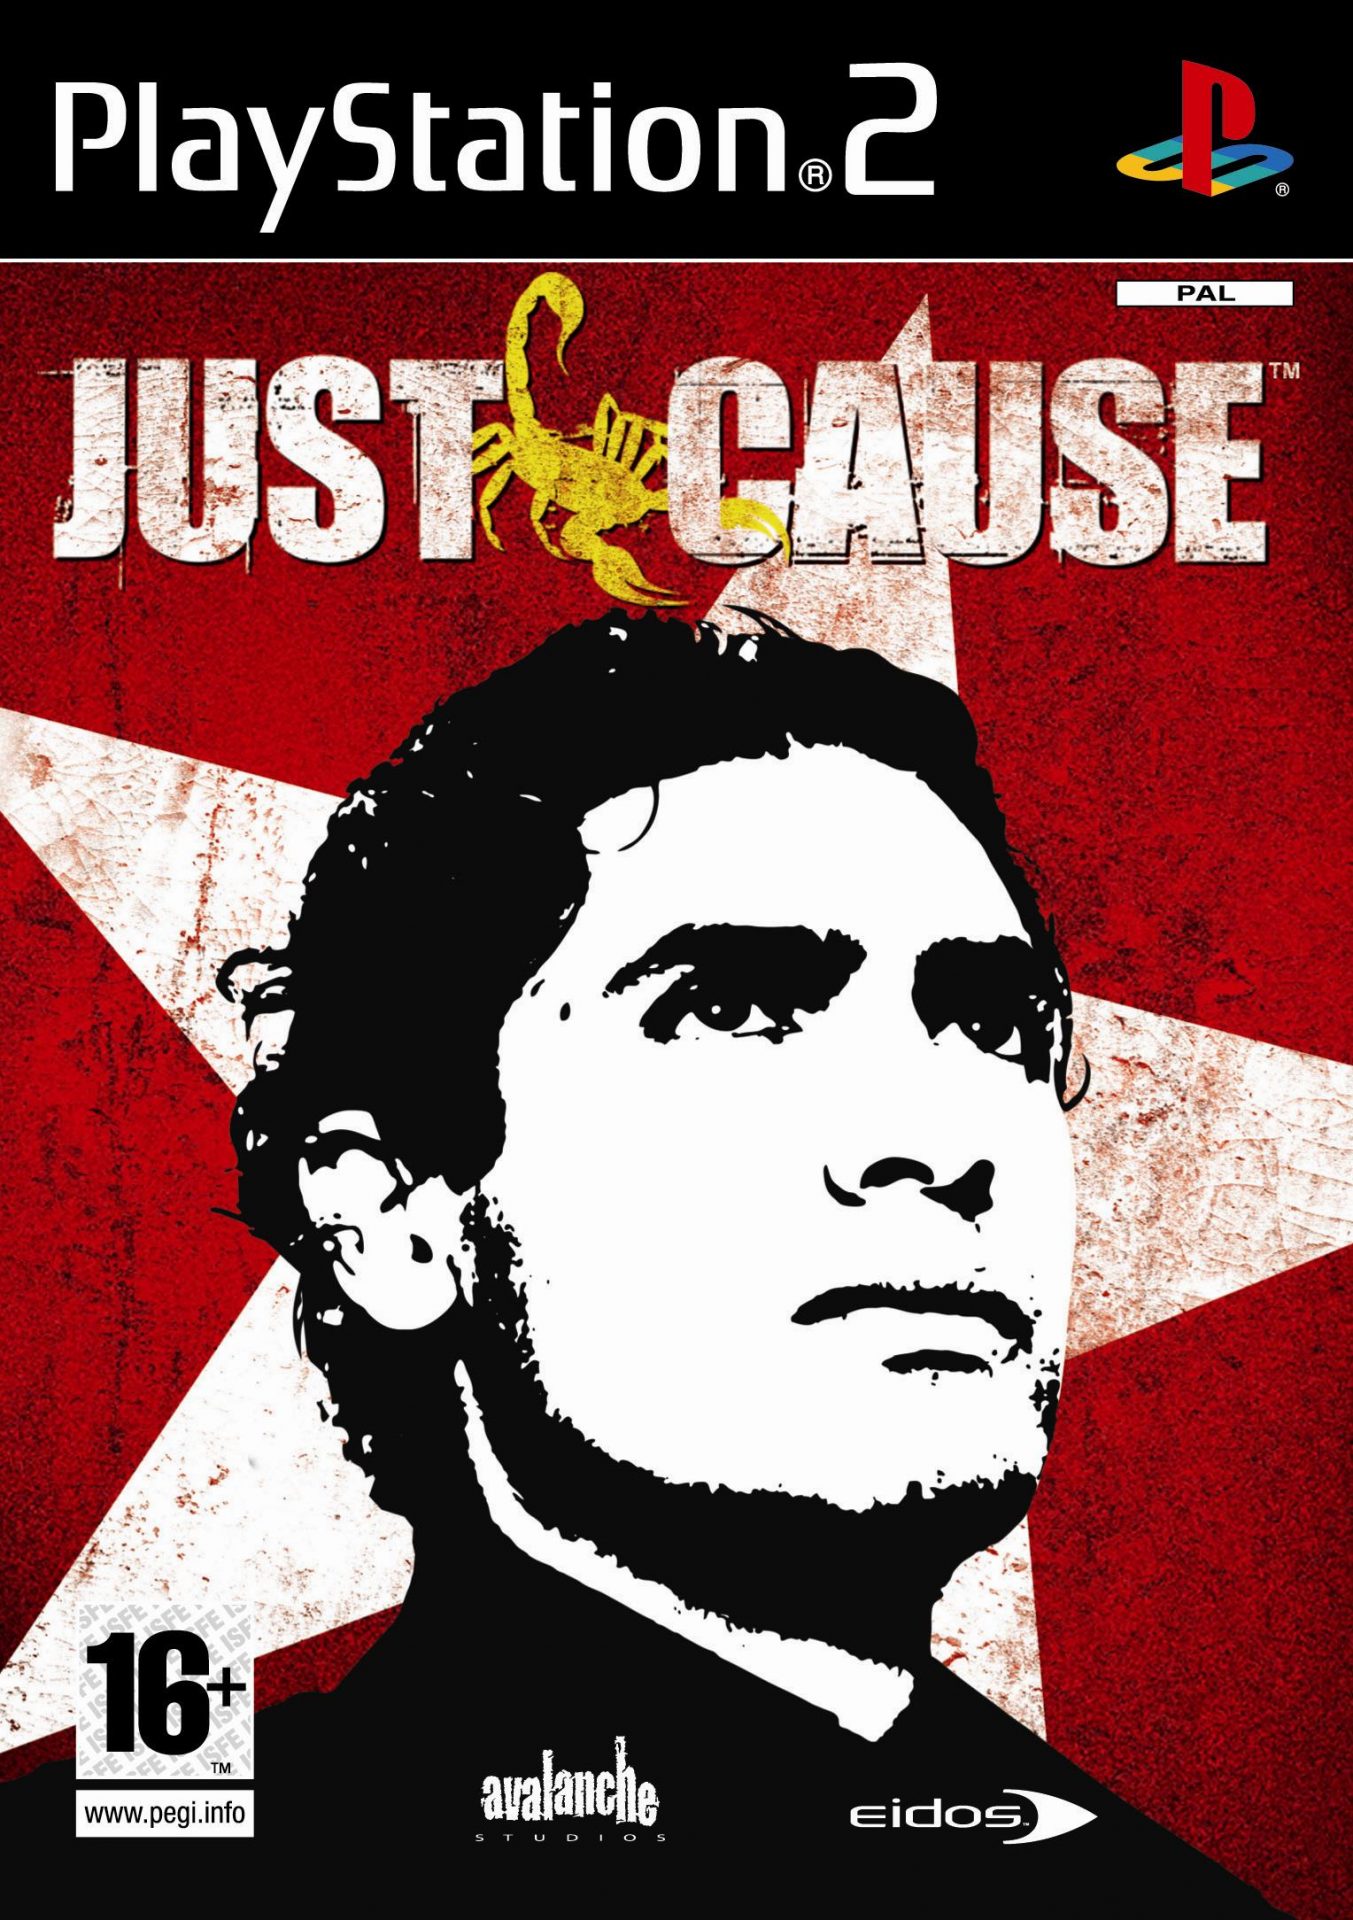 The coverart image of Just Cause